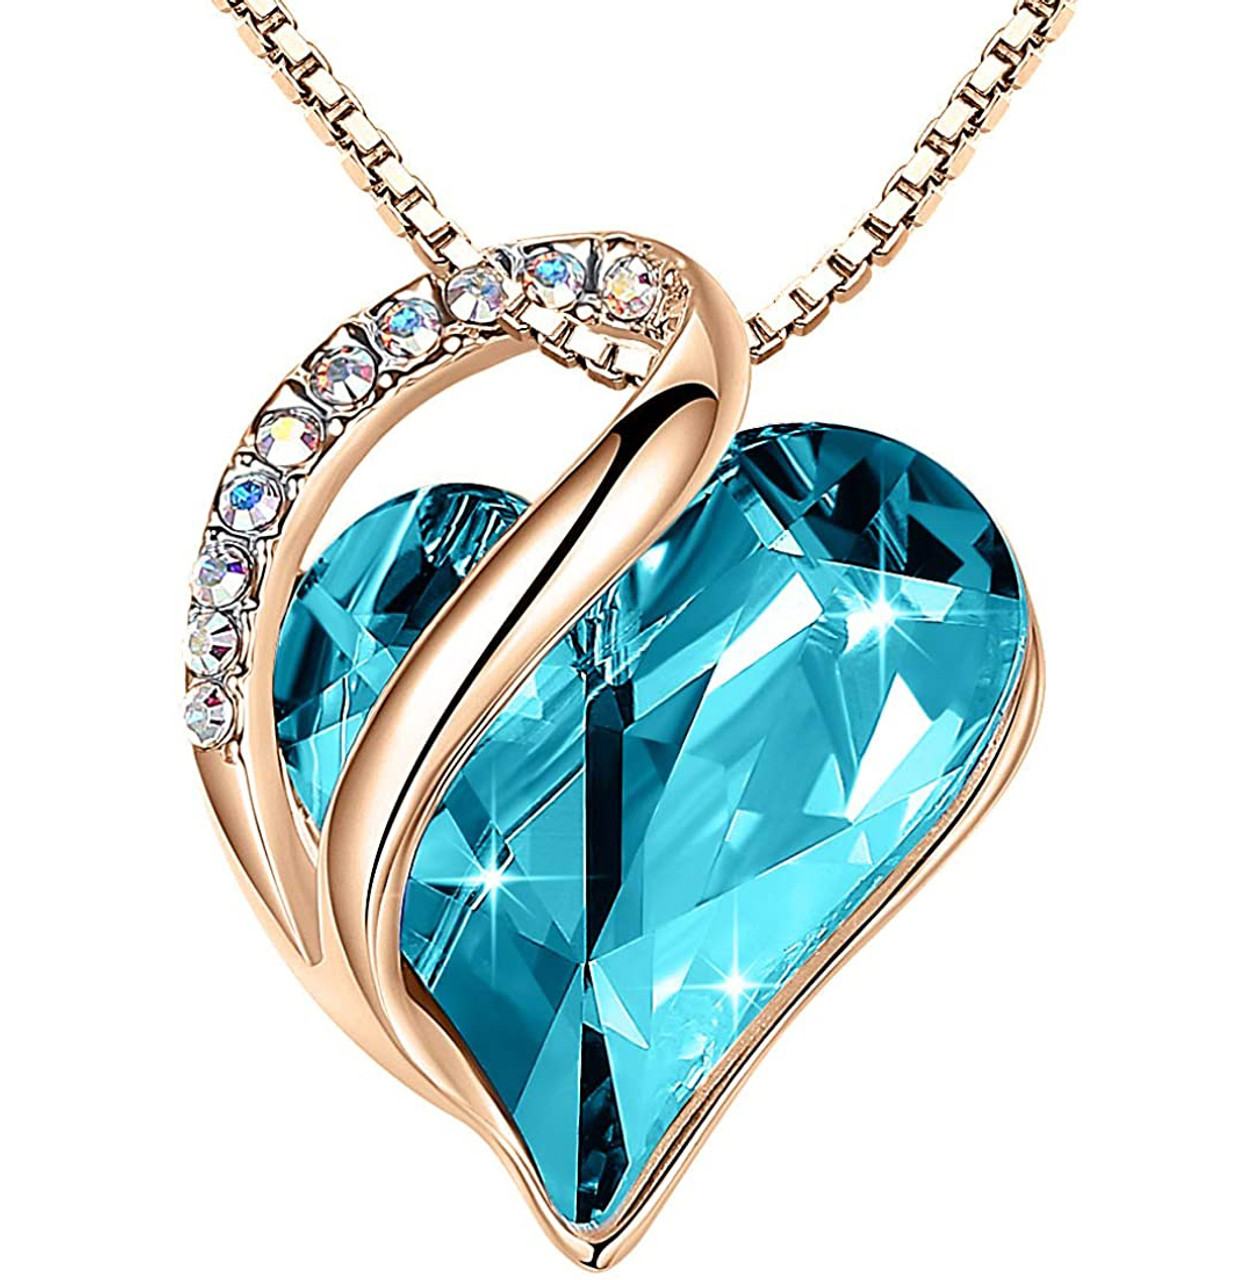 March Birthstone -  Turquoise / Aqua Blue  Looped Heart Design Crystal Rose Gold Pendant and CZ stones - with 18" Chain Necklace. Gift for Lover, Girl Friend, Wife, Valentine's Day Gift, Mother's Day, Anniversary Gift Heart Necklace.